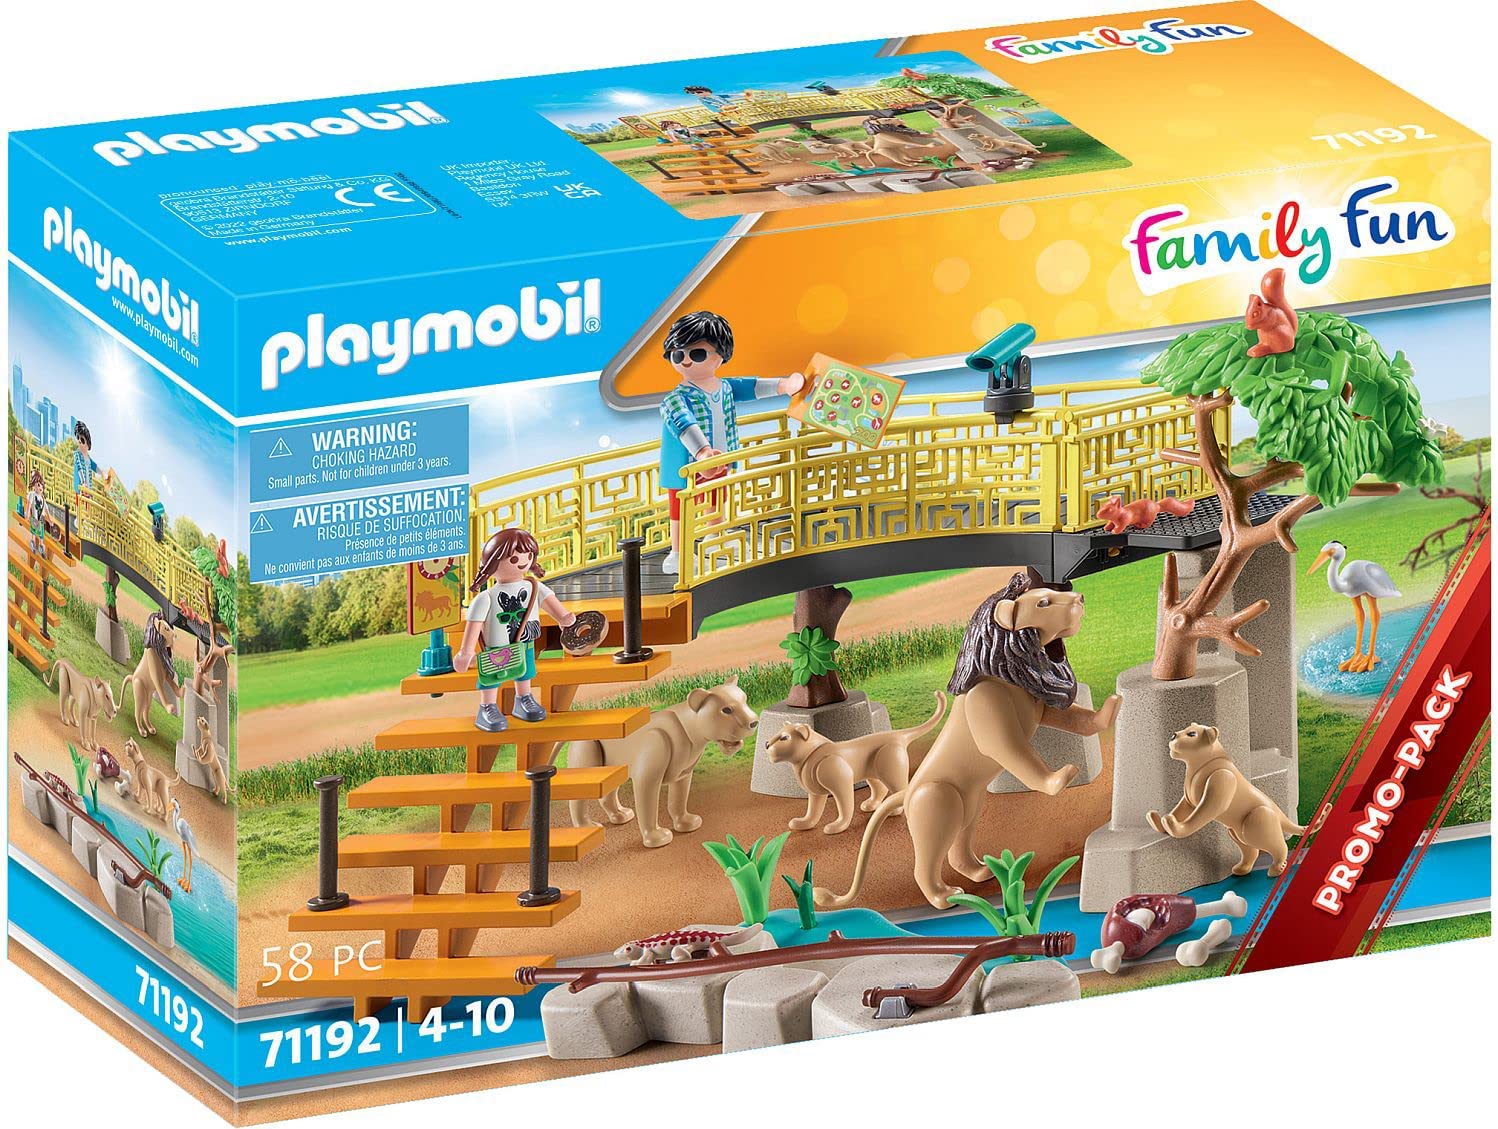 Playmobil Lions in outdoor enclosure